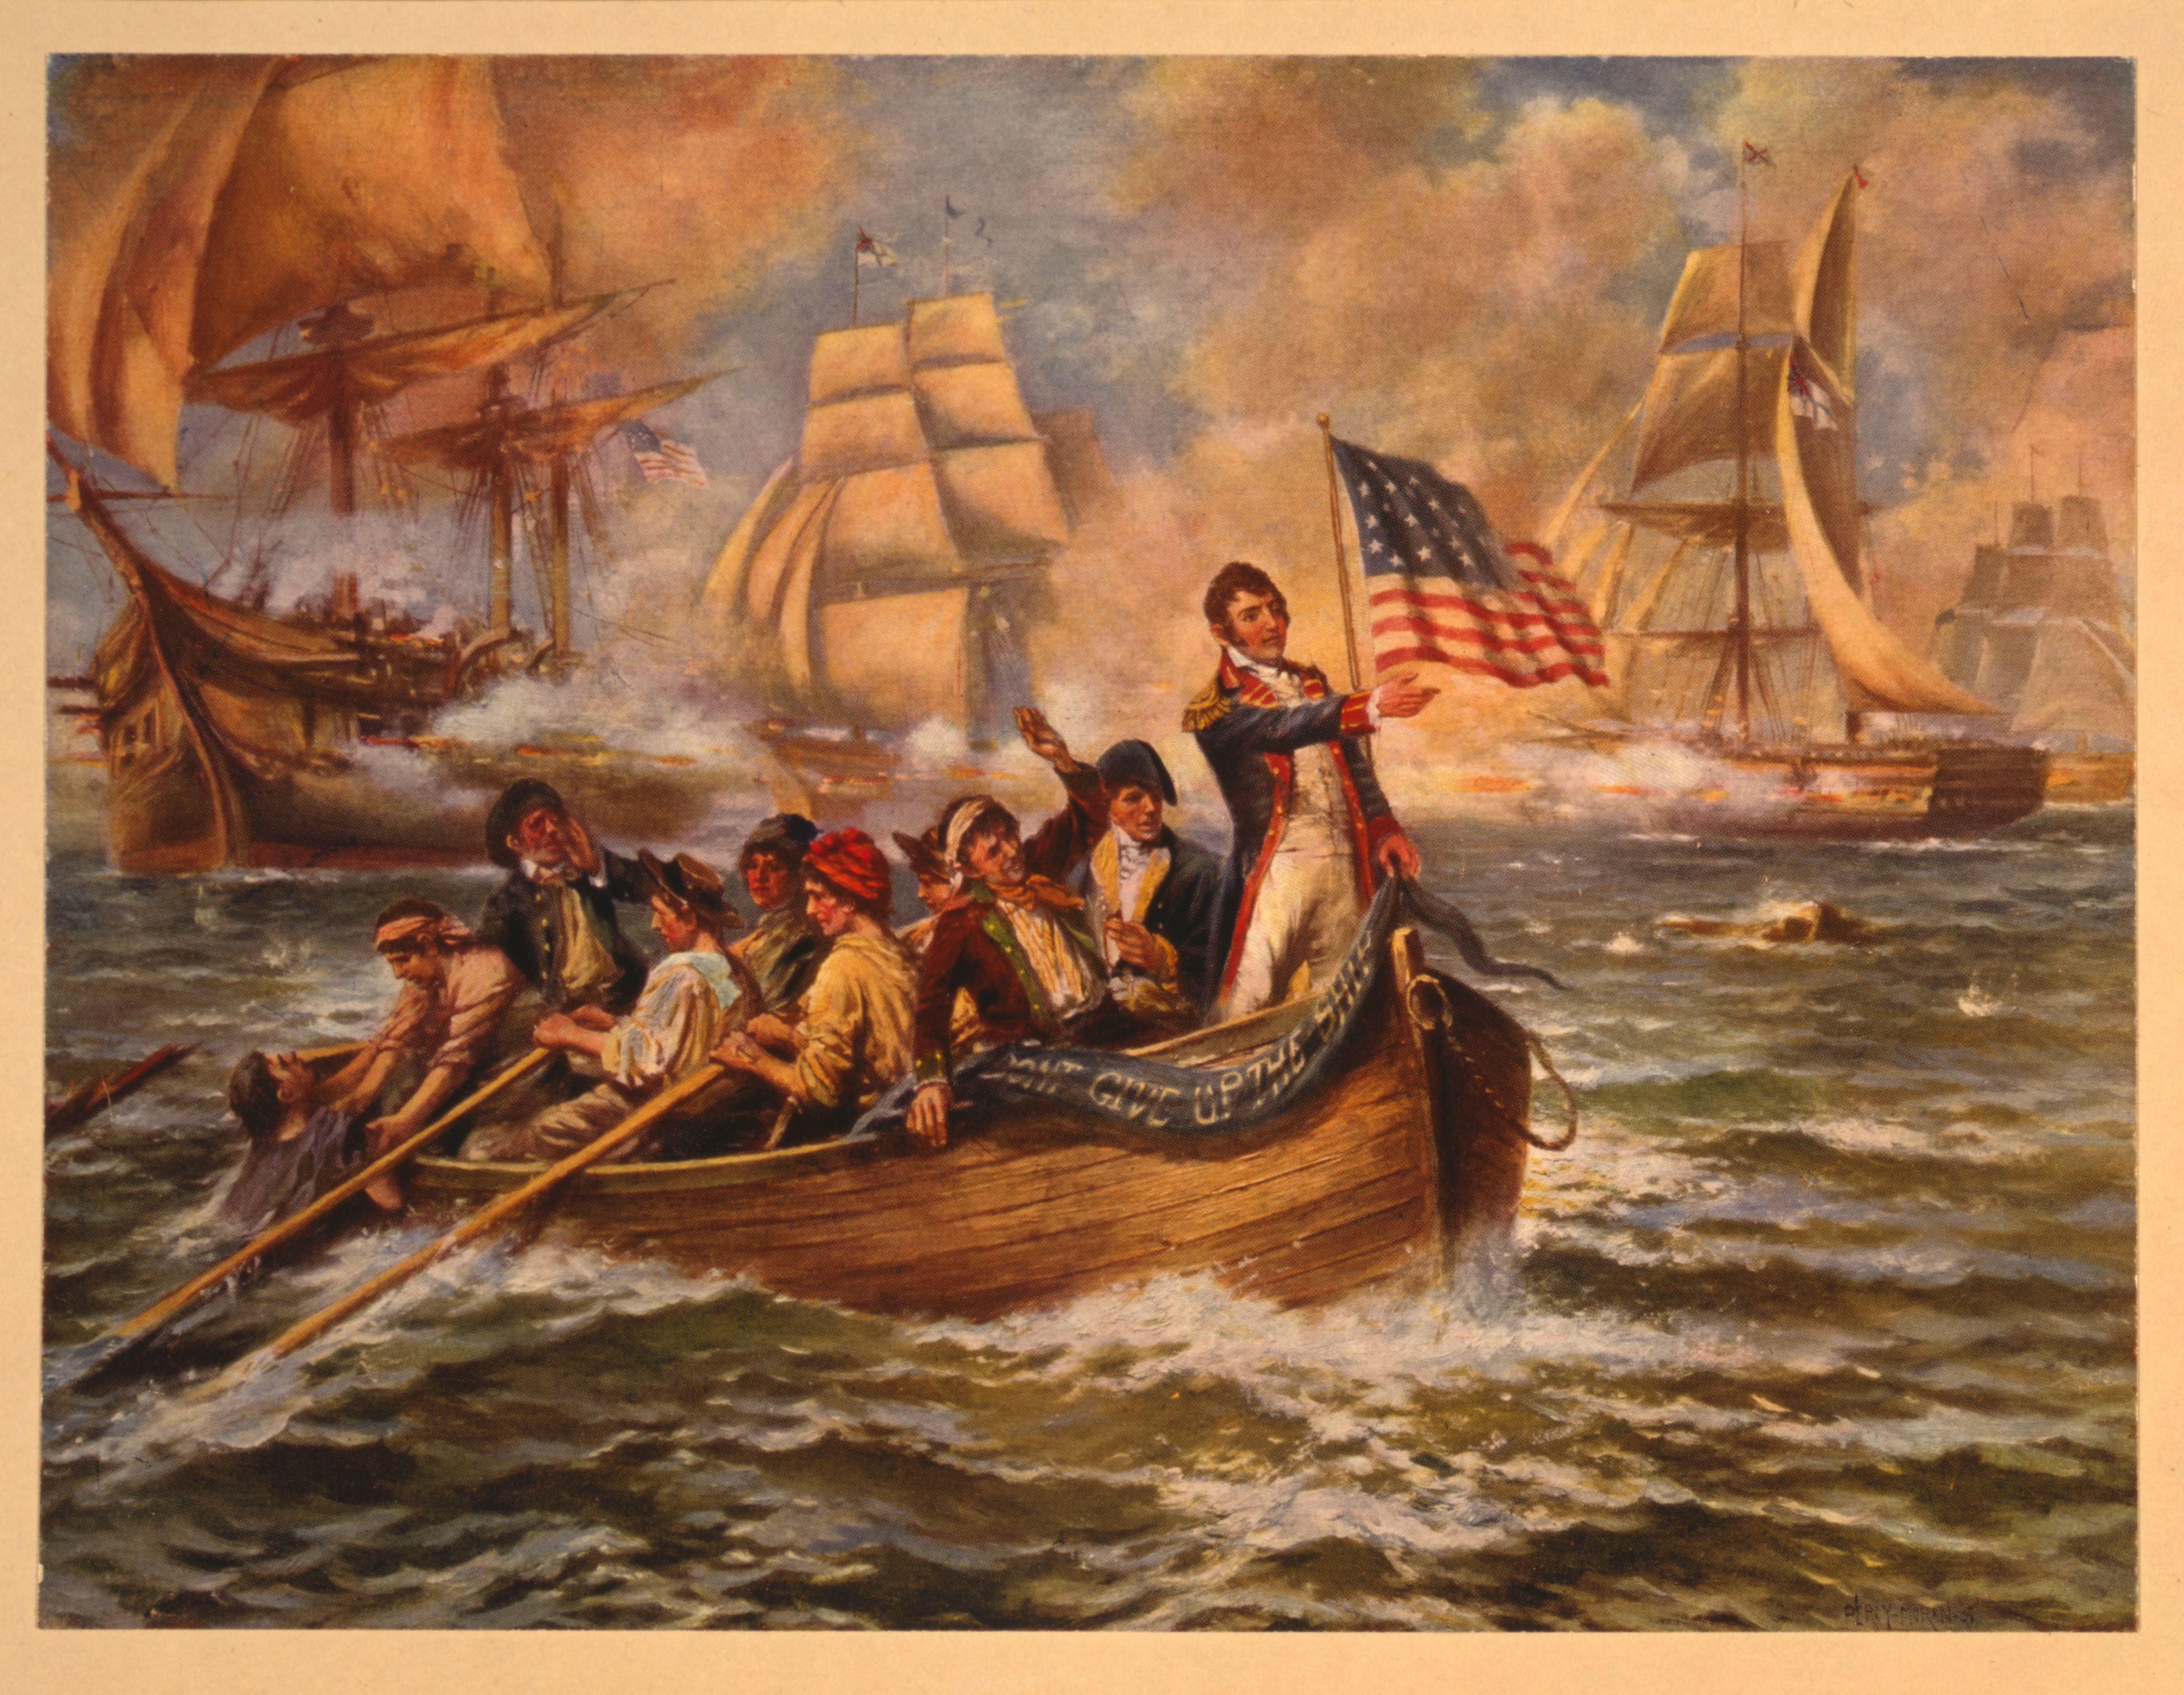 Percy Moran's painting of Perry's Transfer of his Flag to the Niagara